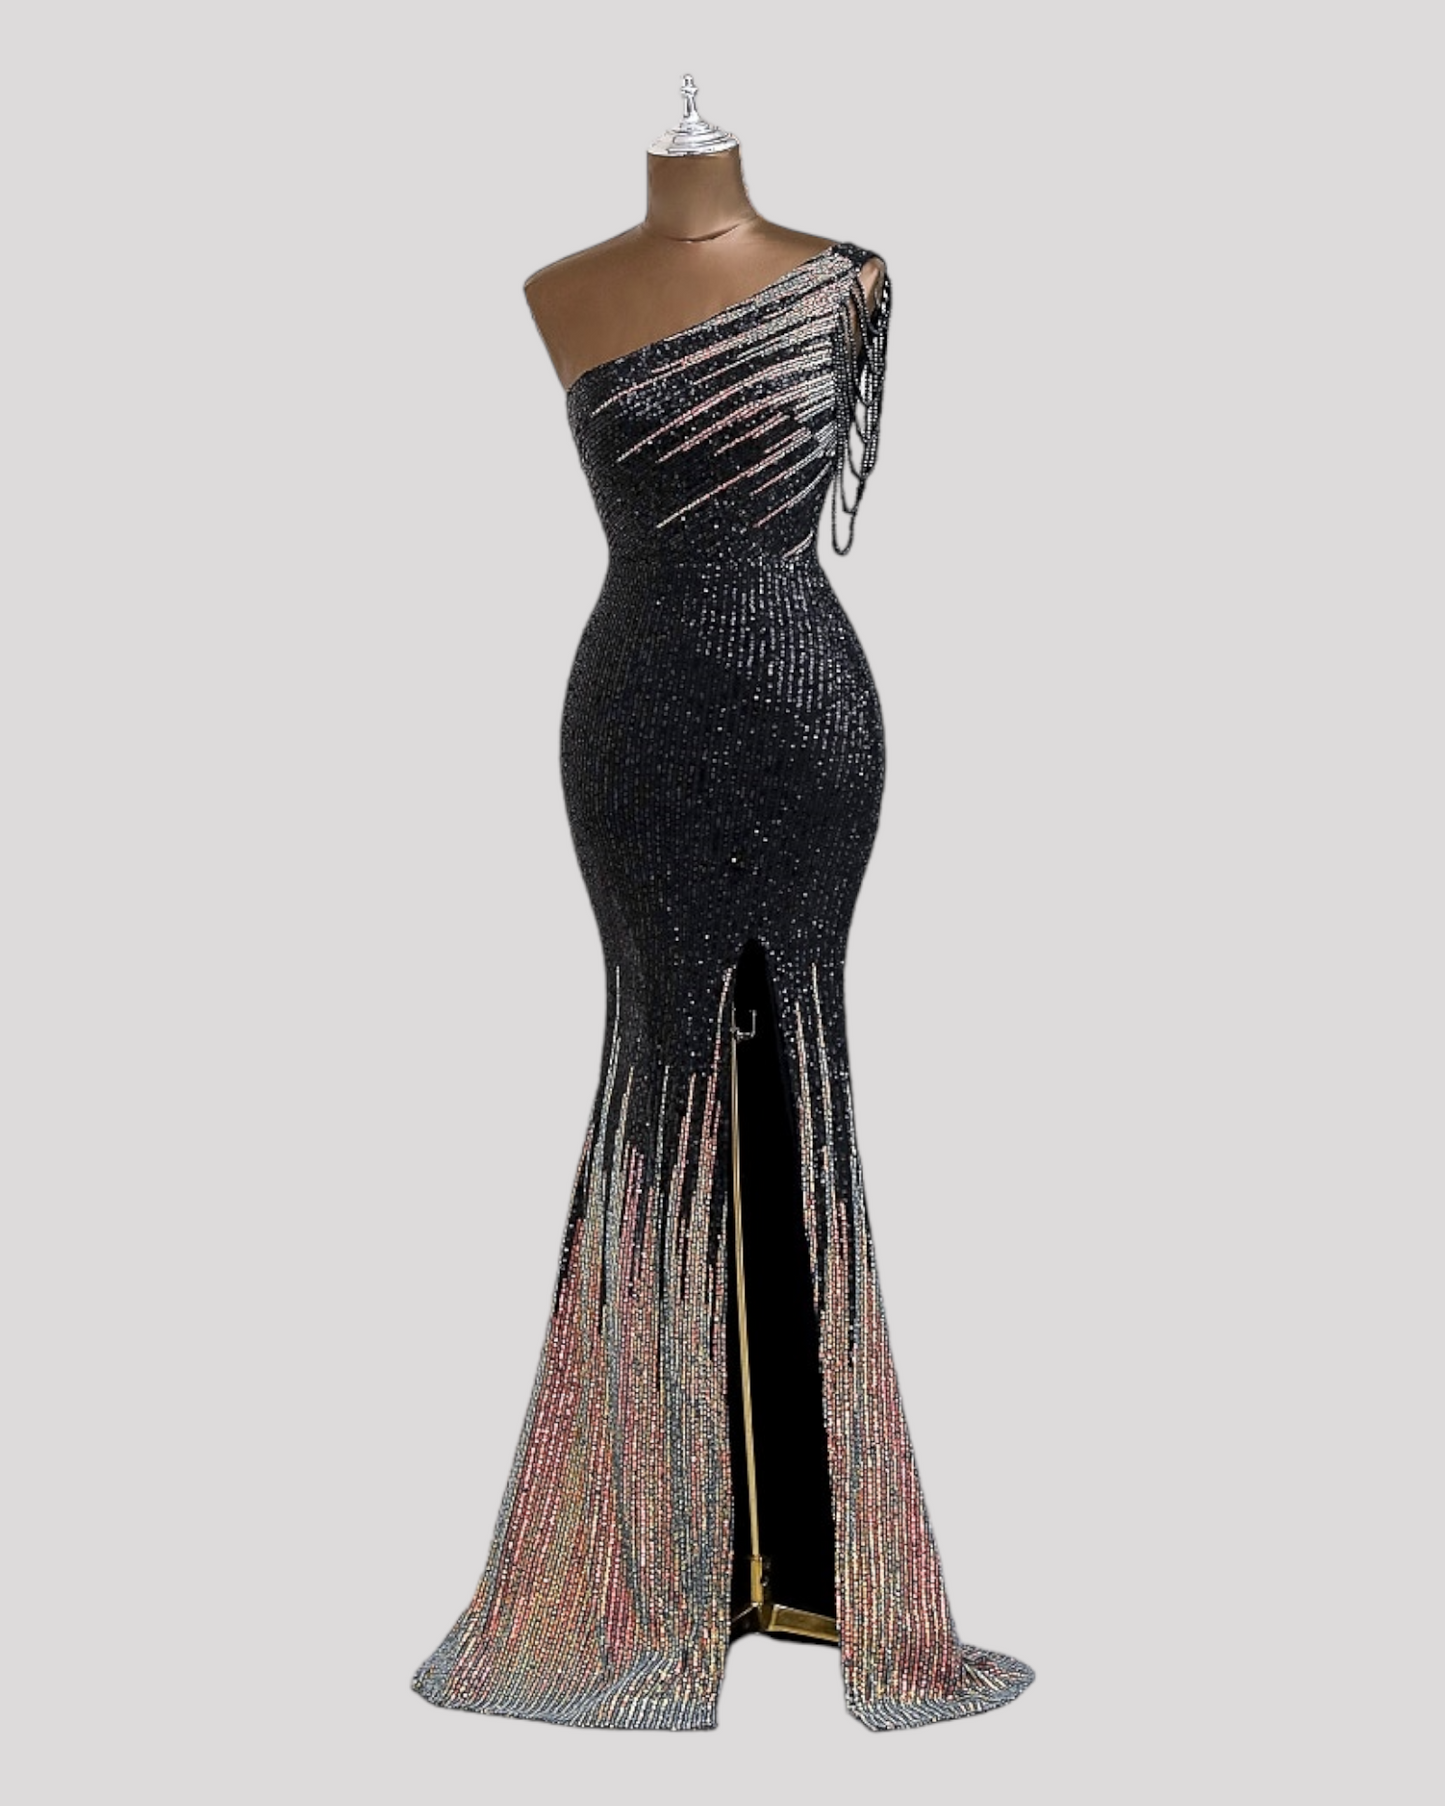 One Shoulder Evening Dress in a 2 Tone Sequin Fabric with Shoulder Beading Draping, Available in 6 colours